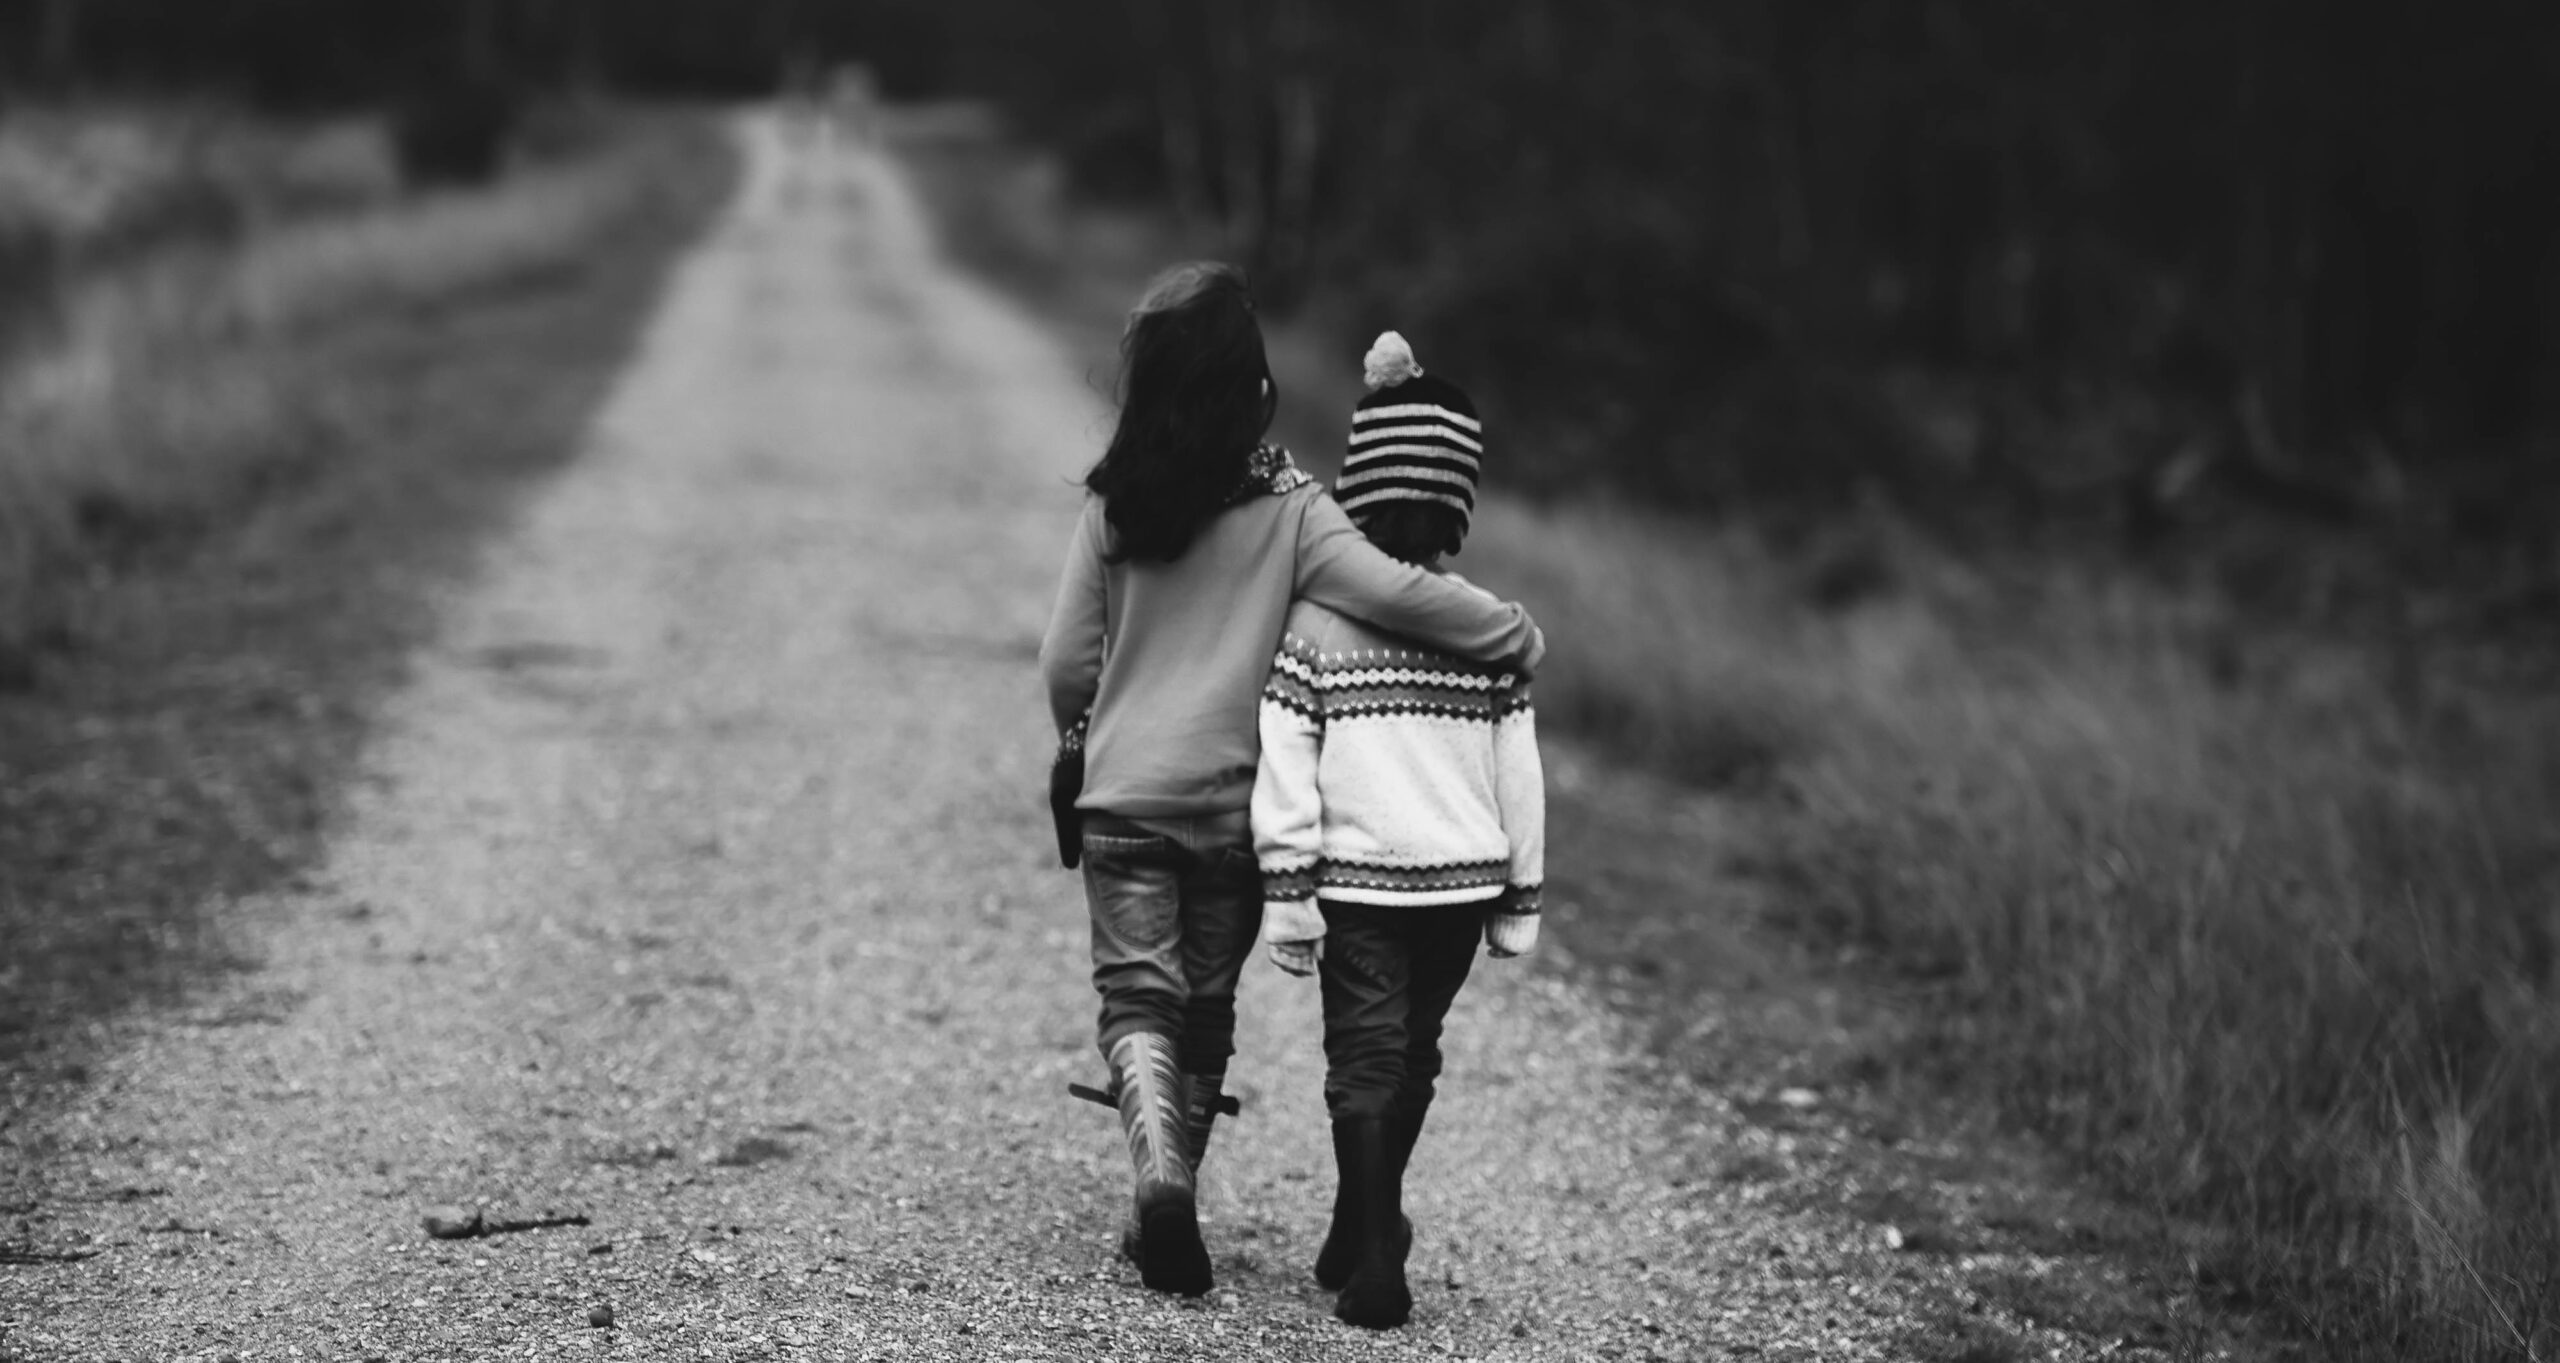 two children walking away arm-in-arm along a road - black and white image